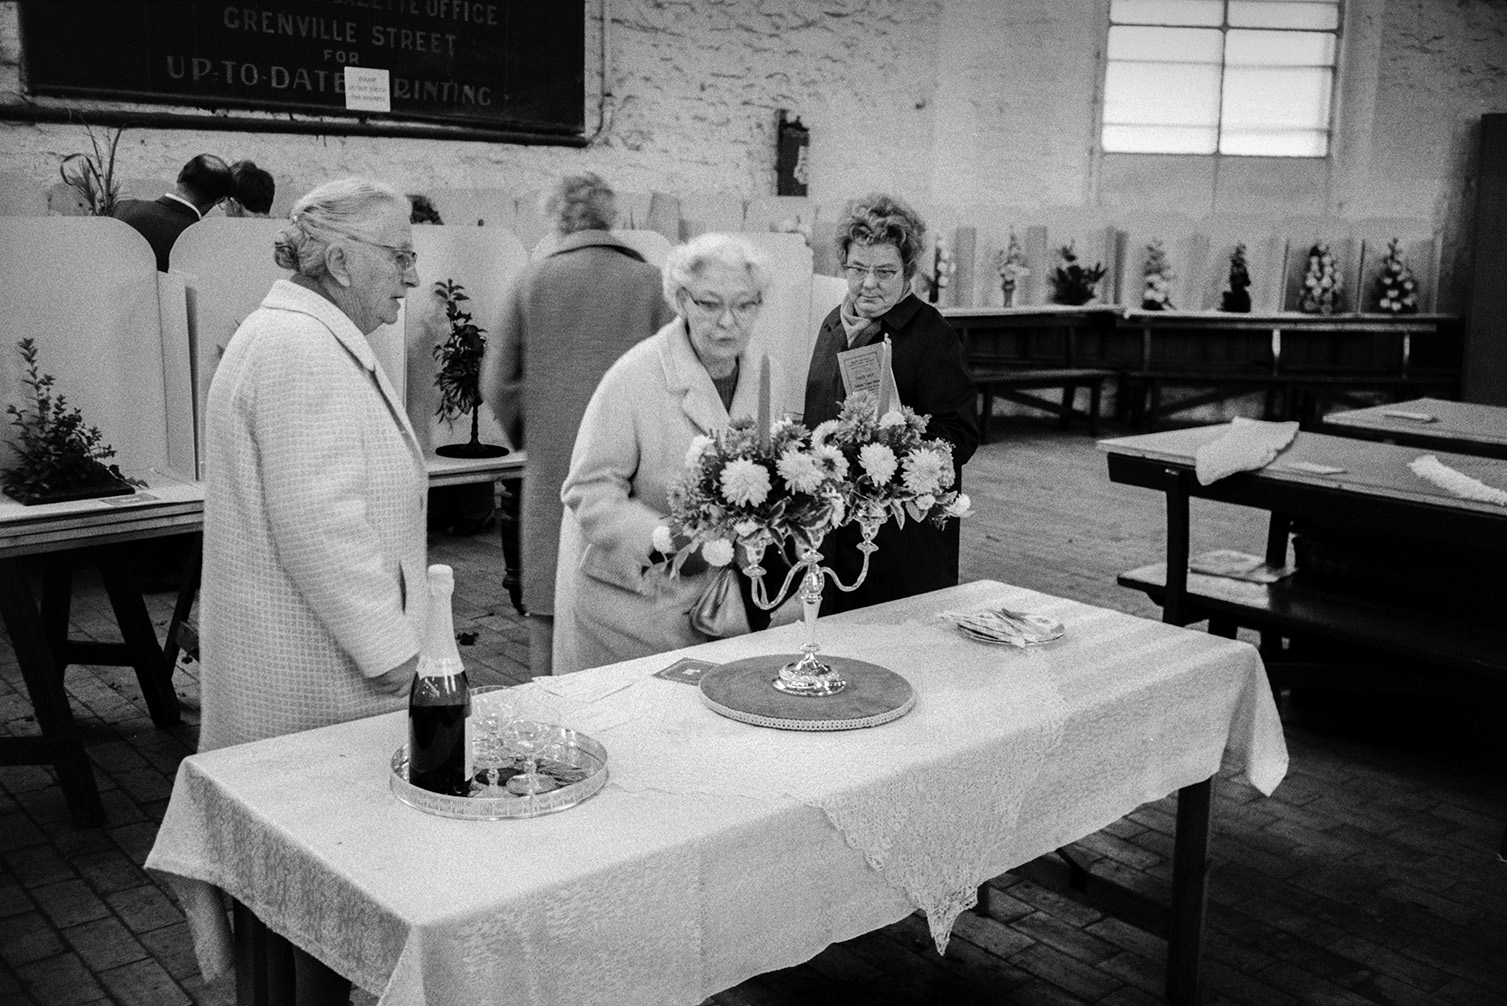 Three women looking at a flower arrangement in a candelabra at a flower show in Bideford Pannier Market. A tray with a bottle of champagne and glasses is next to the flower display.